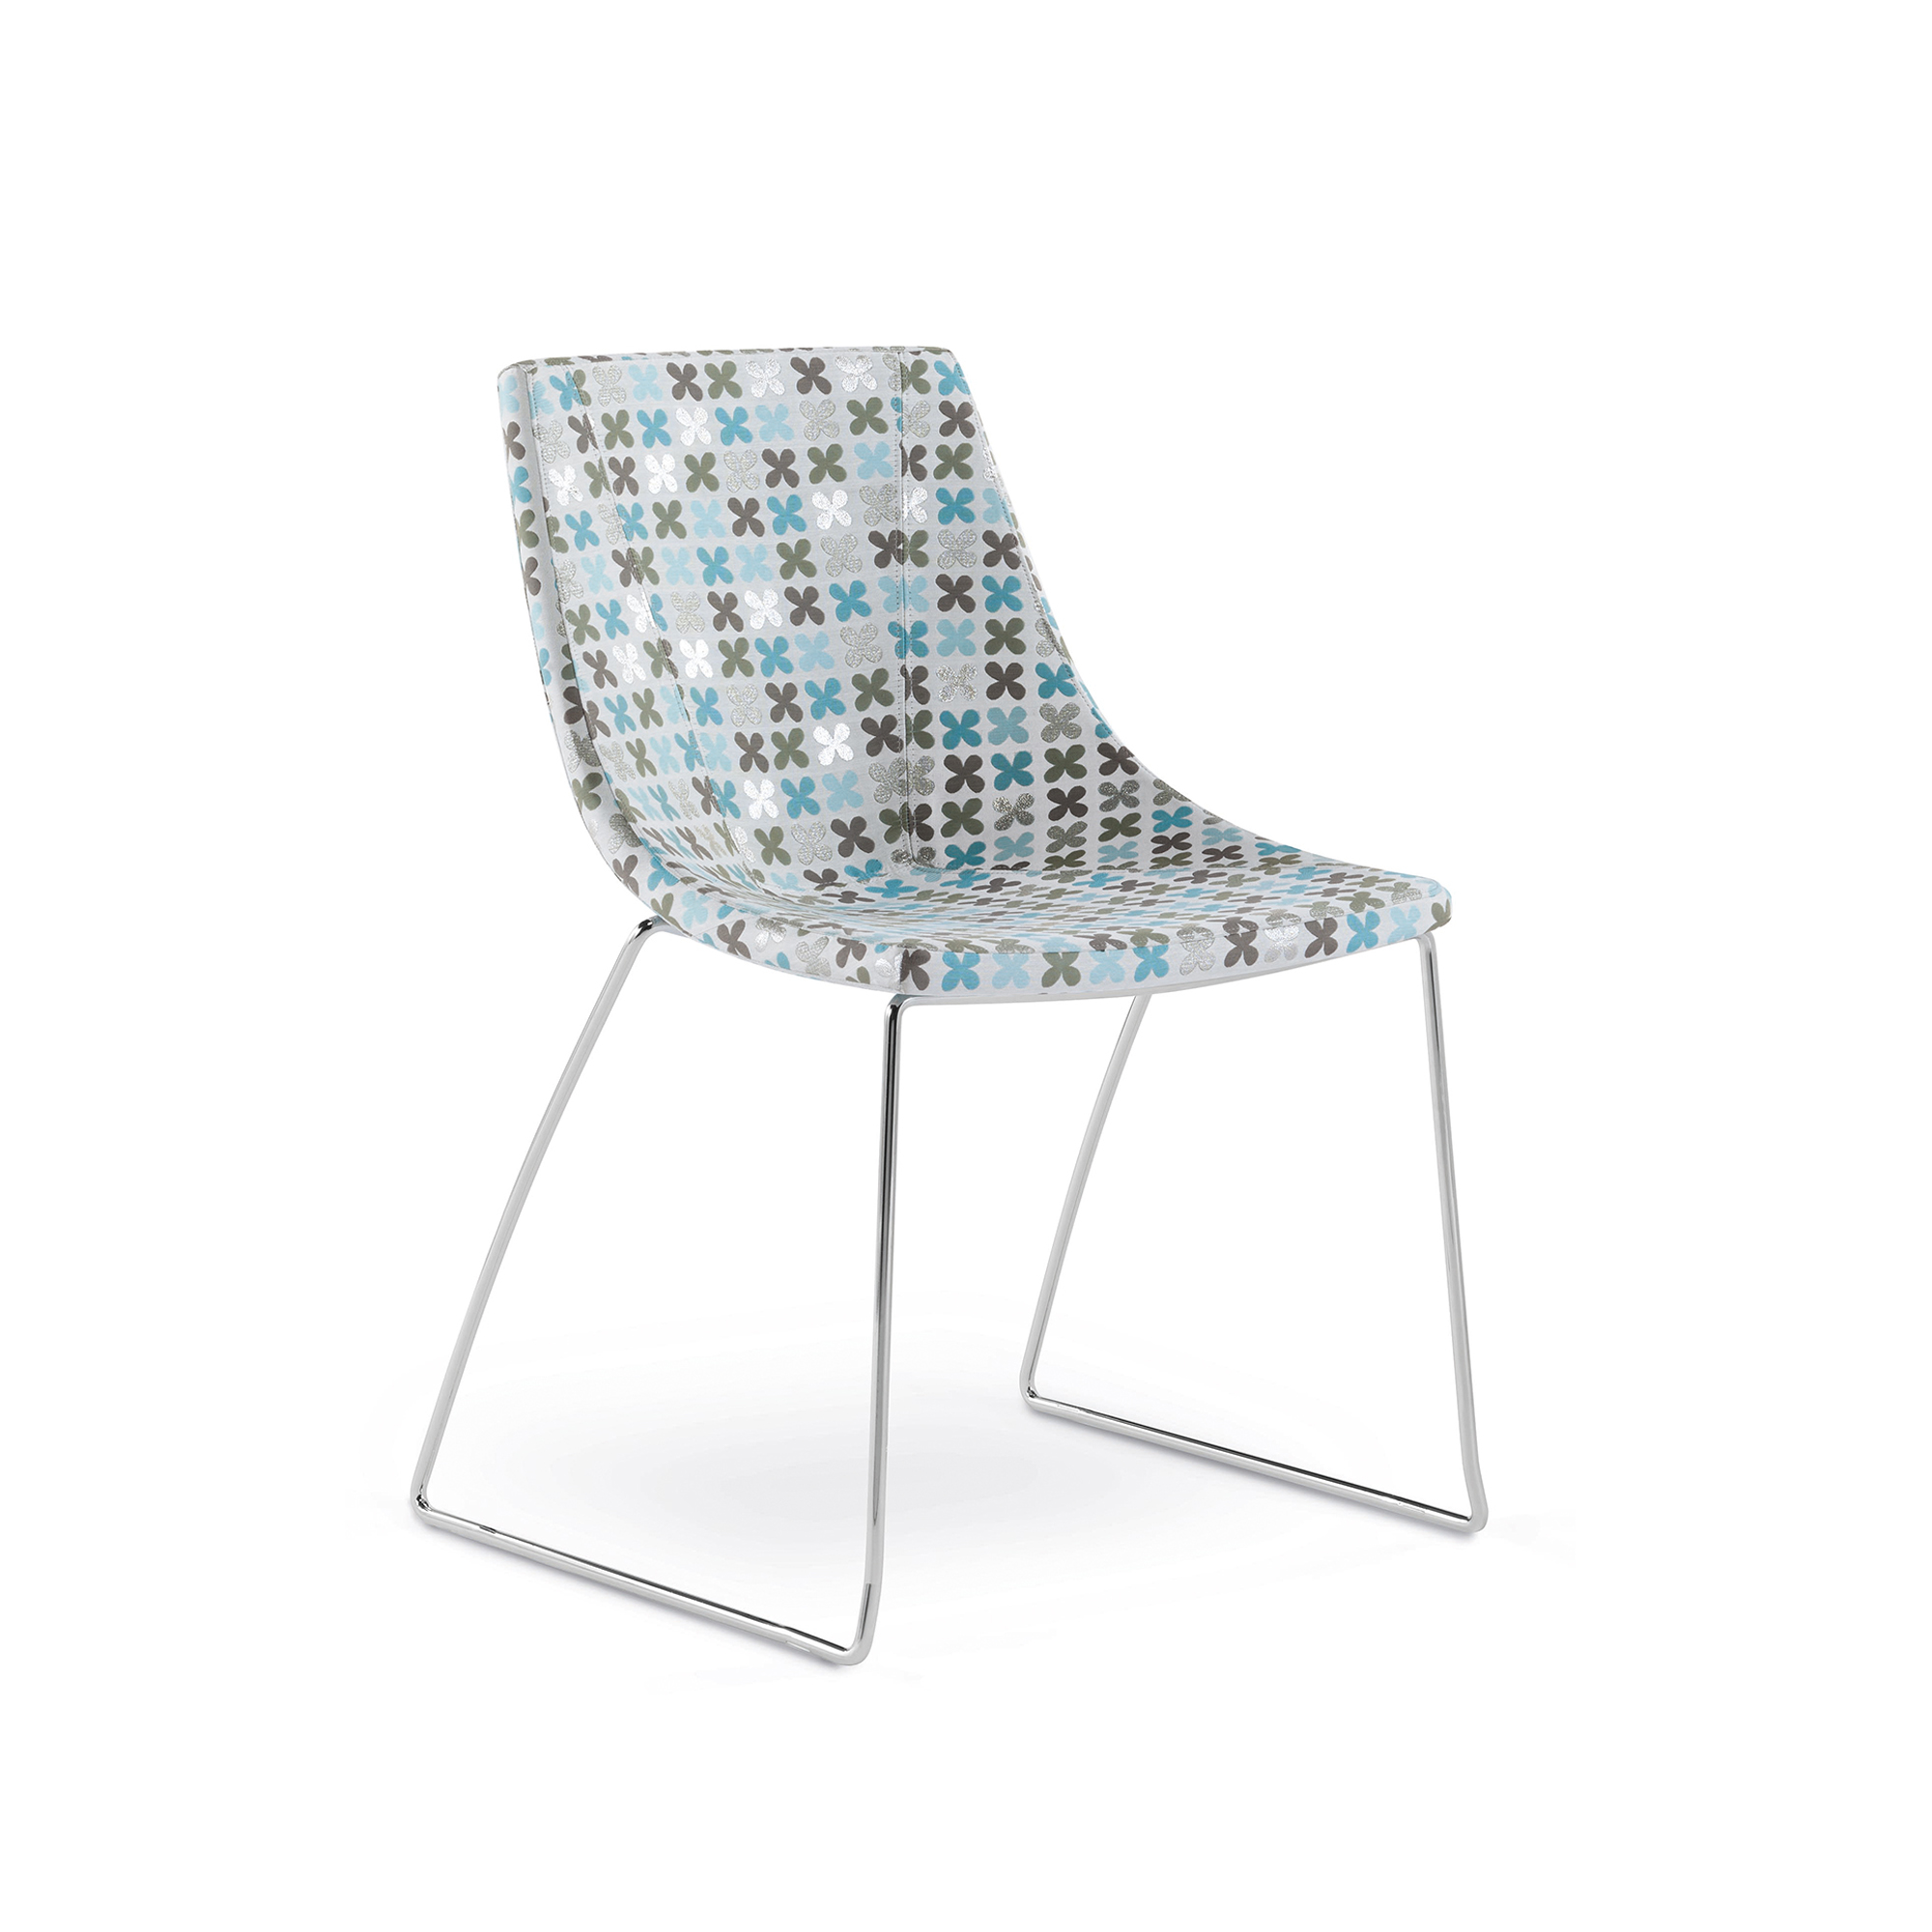 Chirp Guest Chair, Sled Base, Patterned Upholstery